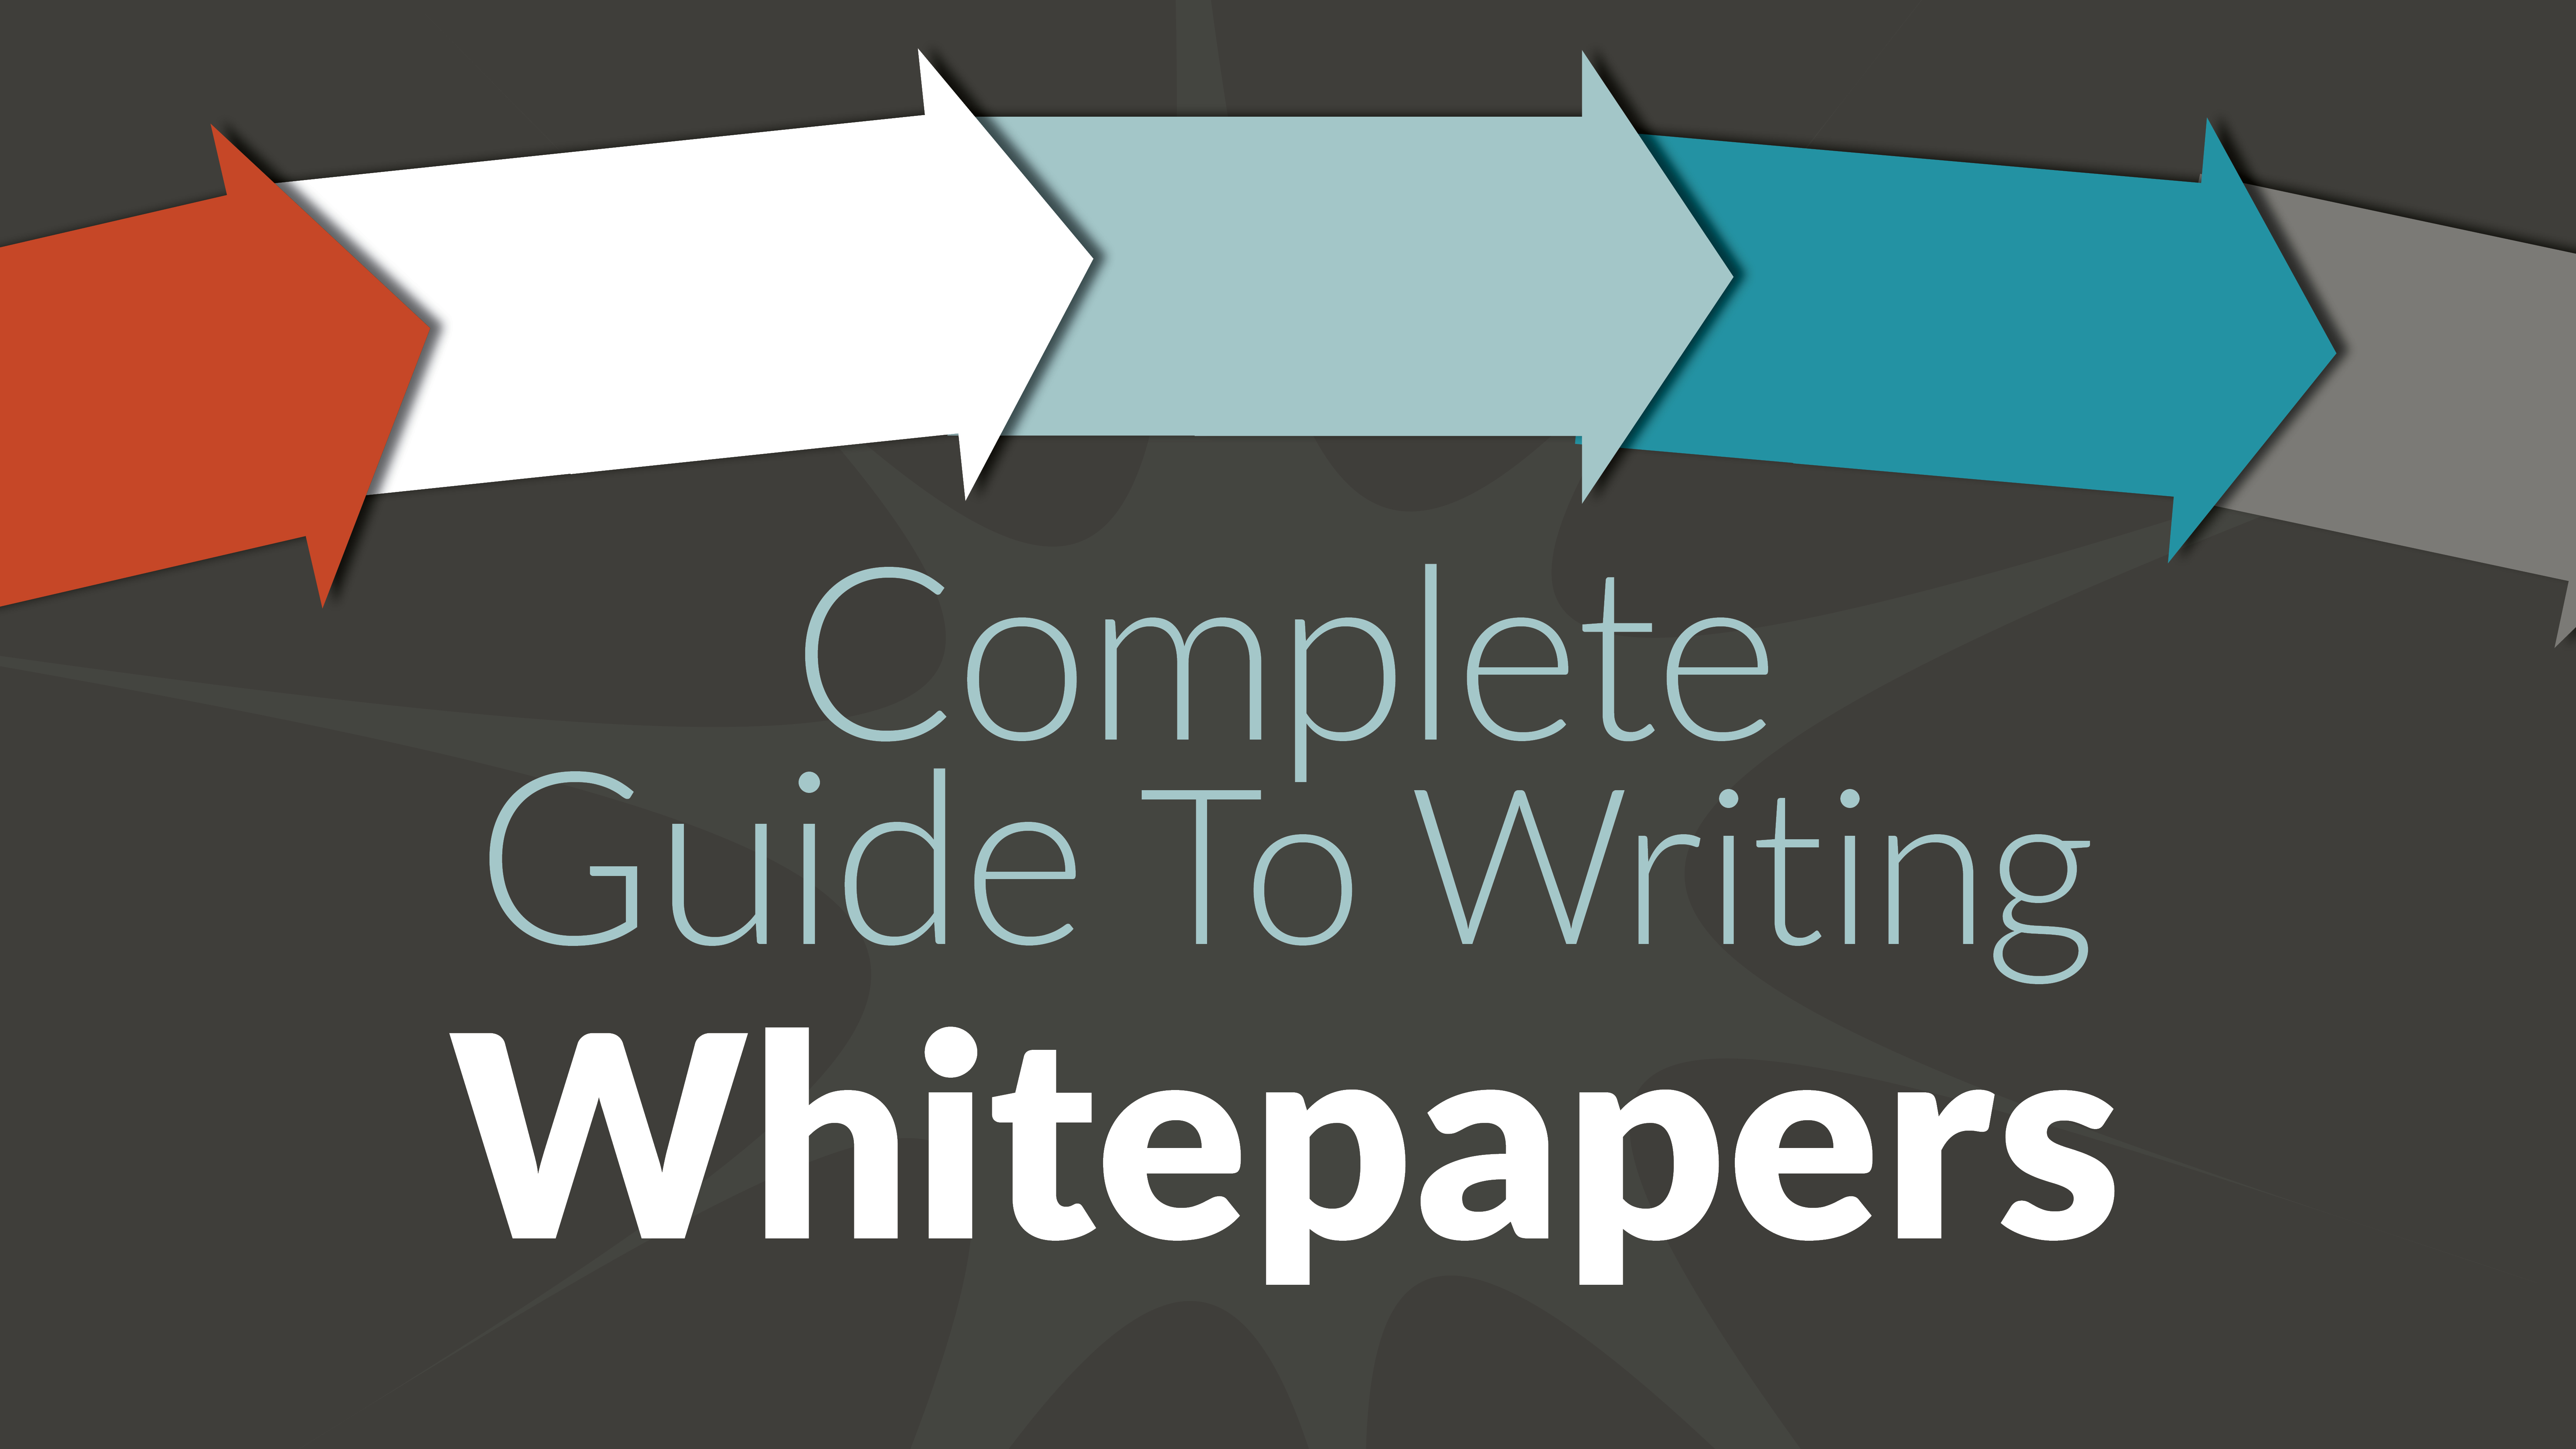 The Ultimate Checklist For Writing Whitepapers And Reports That Generate Leads